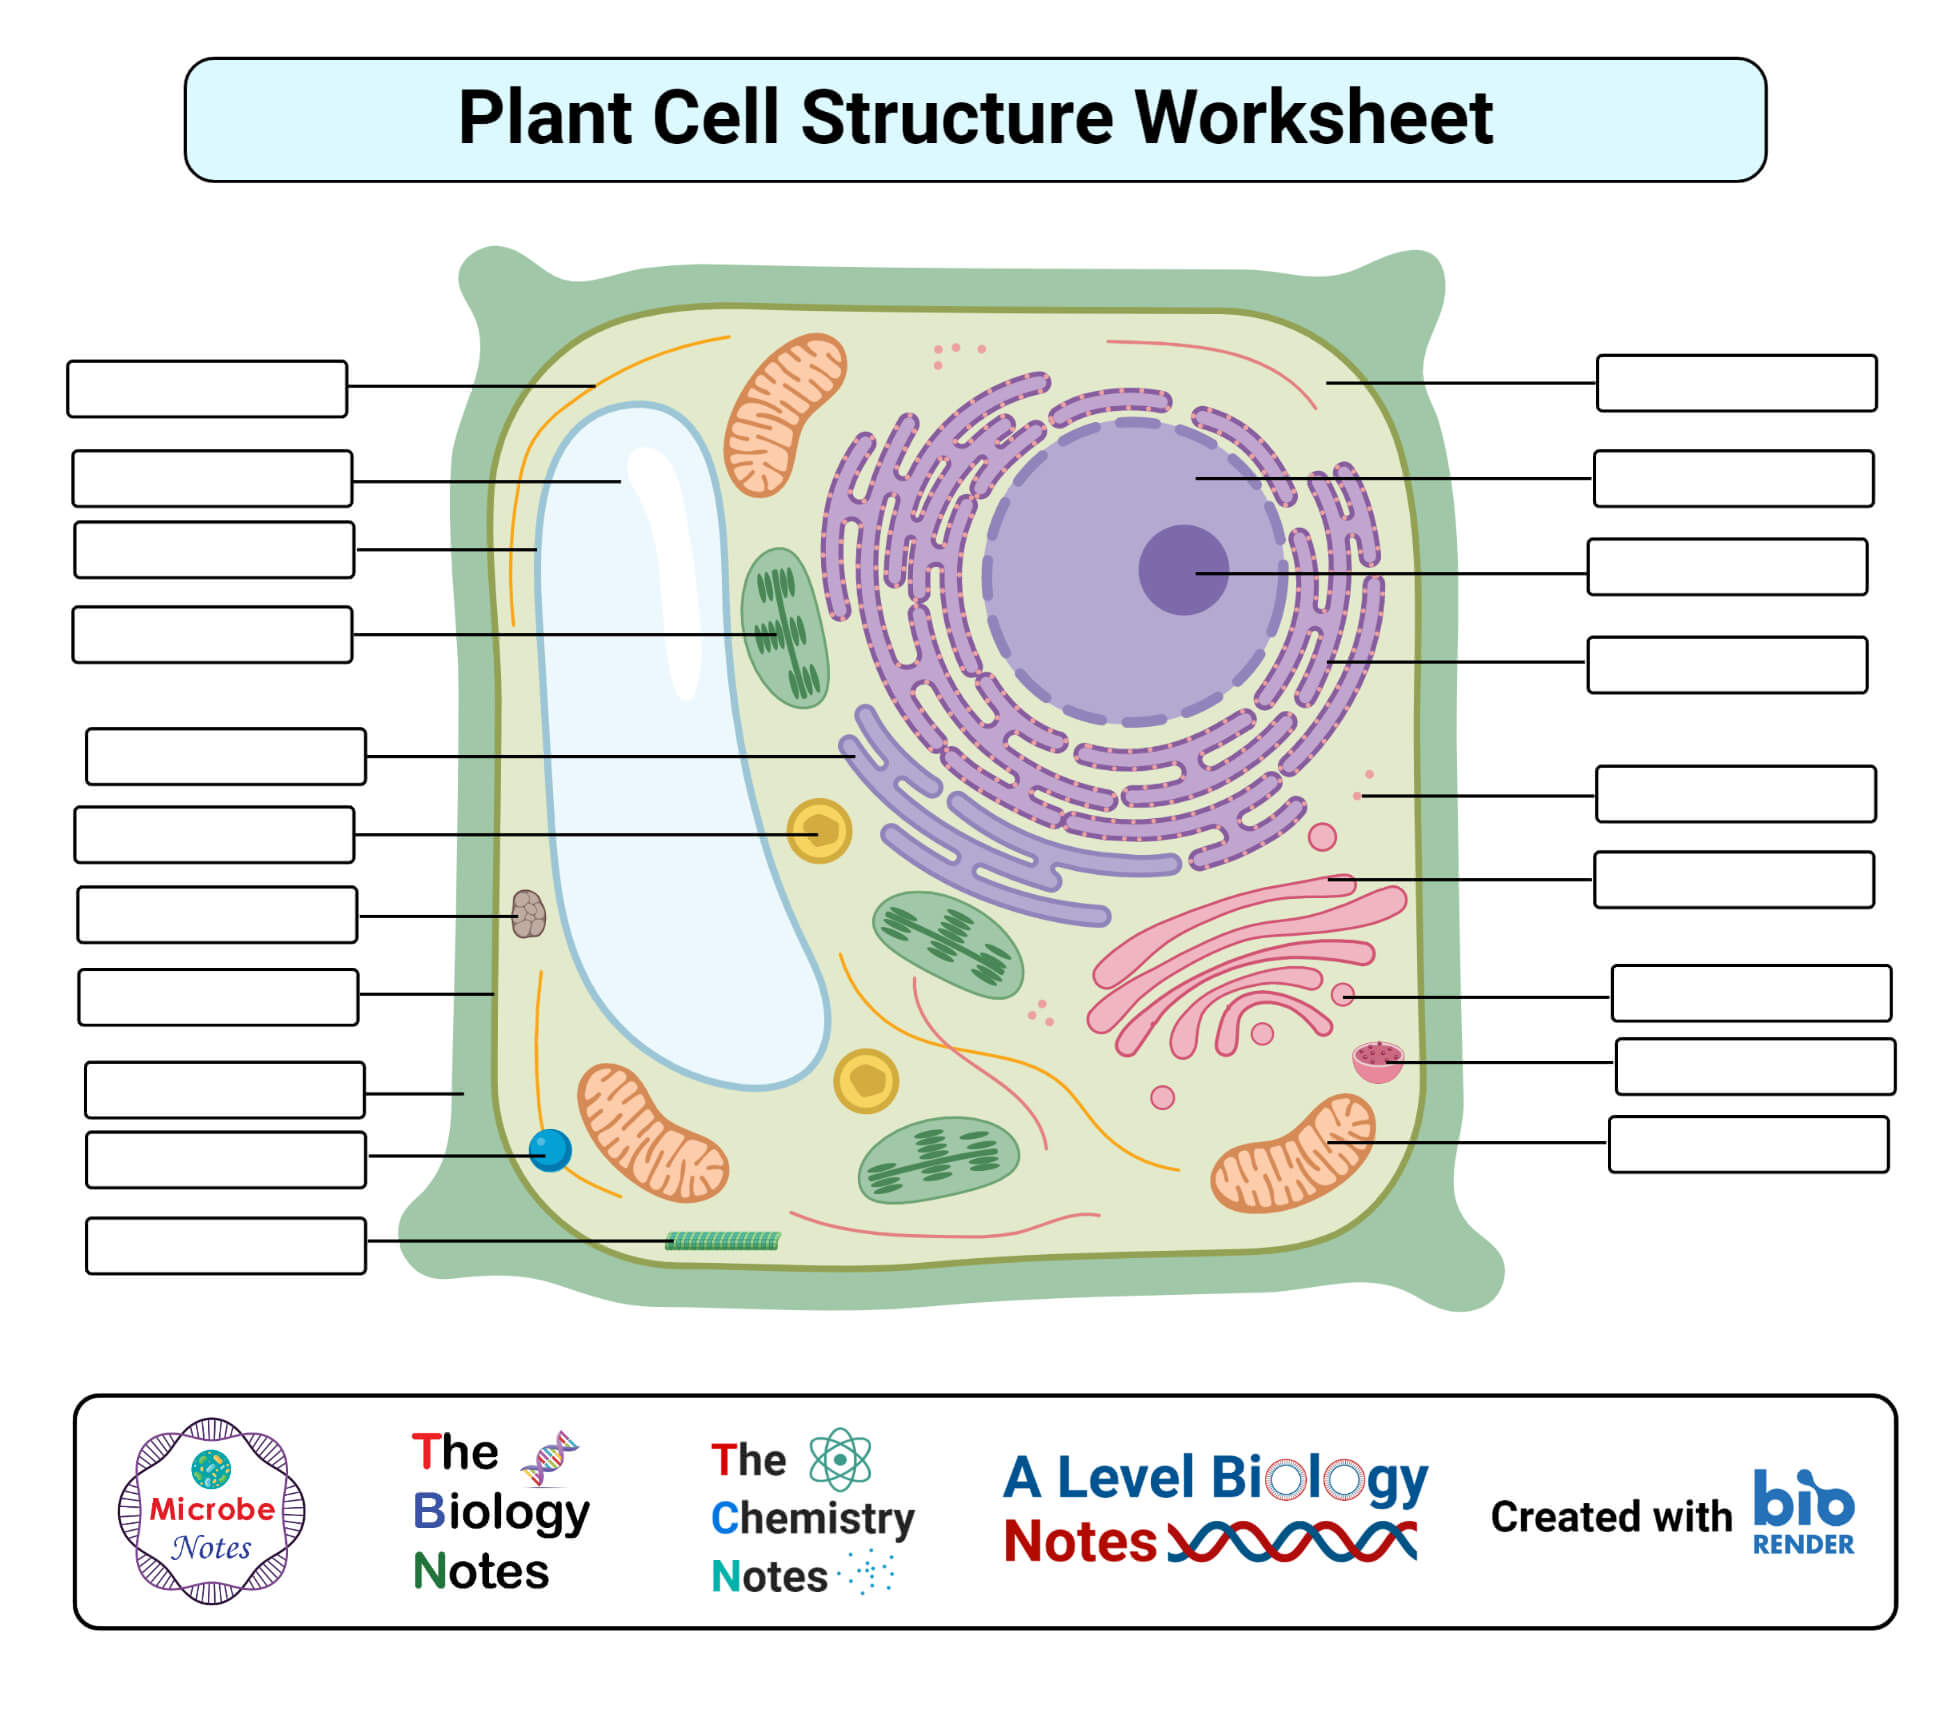 Plant Cell- Definition, Structure, Parts, Functions, Labeled Diagram